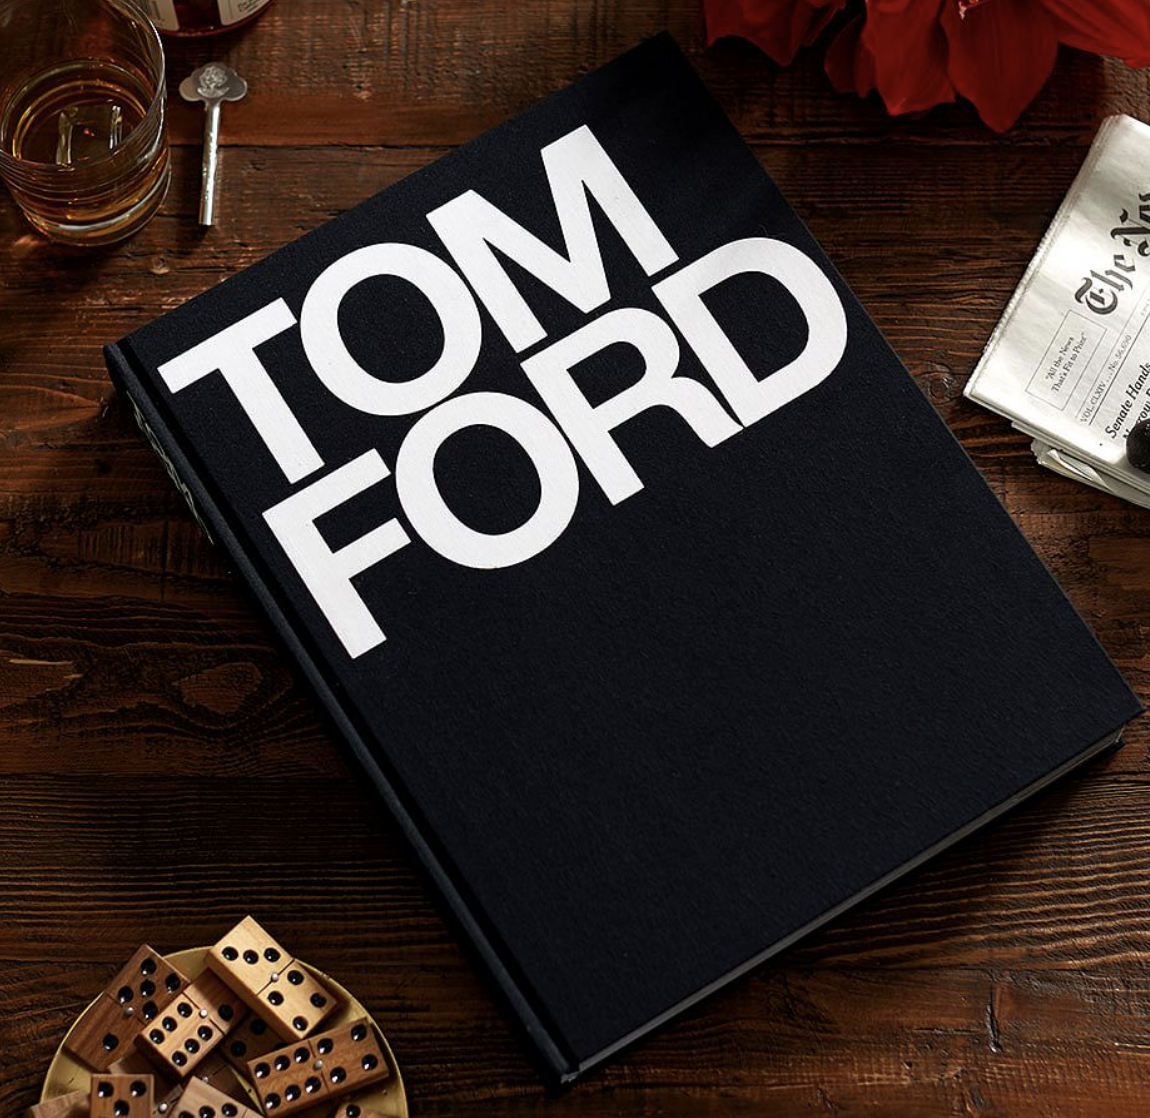 A copy of the large Tom Ford book on a coffee table next to a small bowl of wooden domino pieces and a cocktail